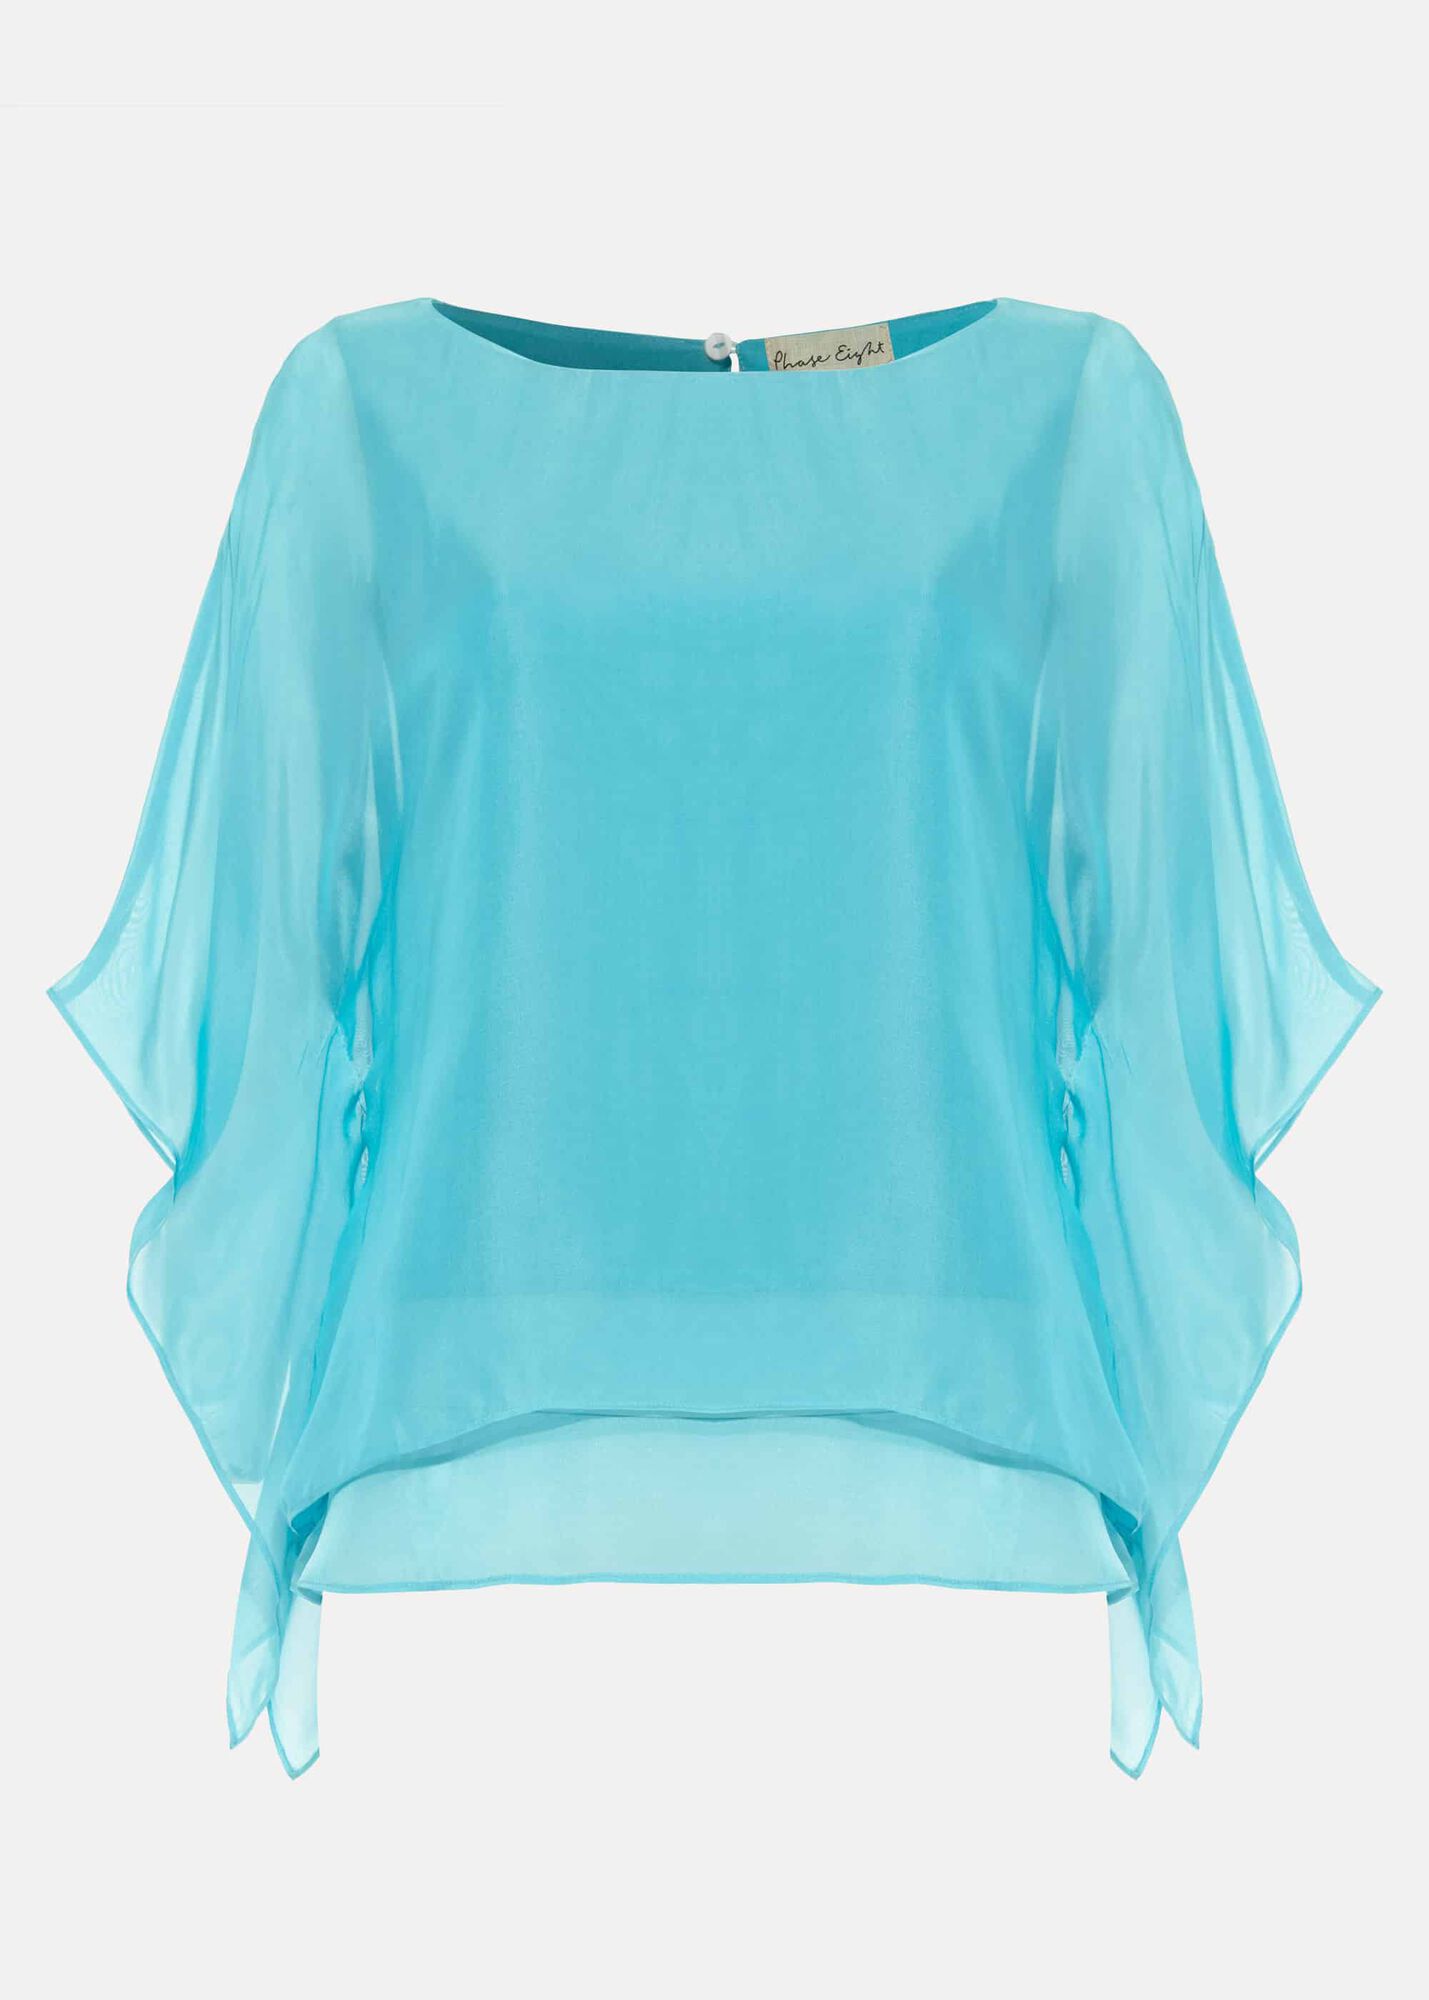 Belle-Rose Silk Blouse | Phase Eight | Phase Eight